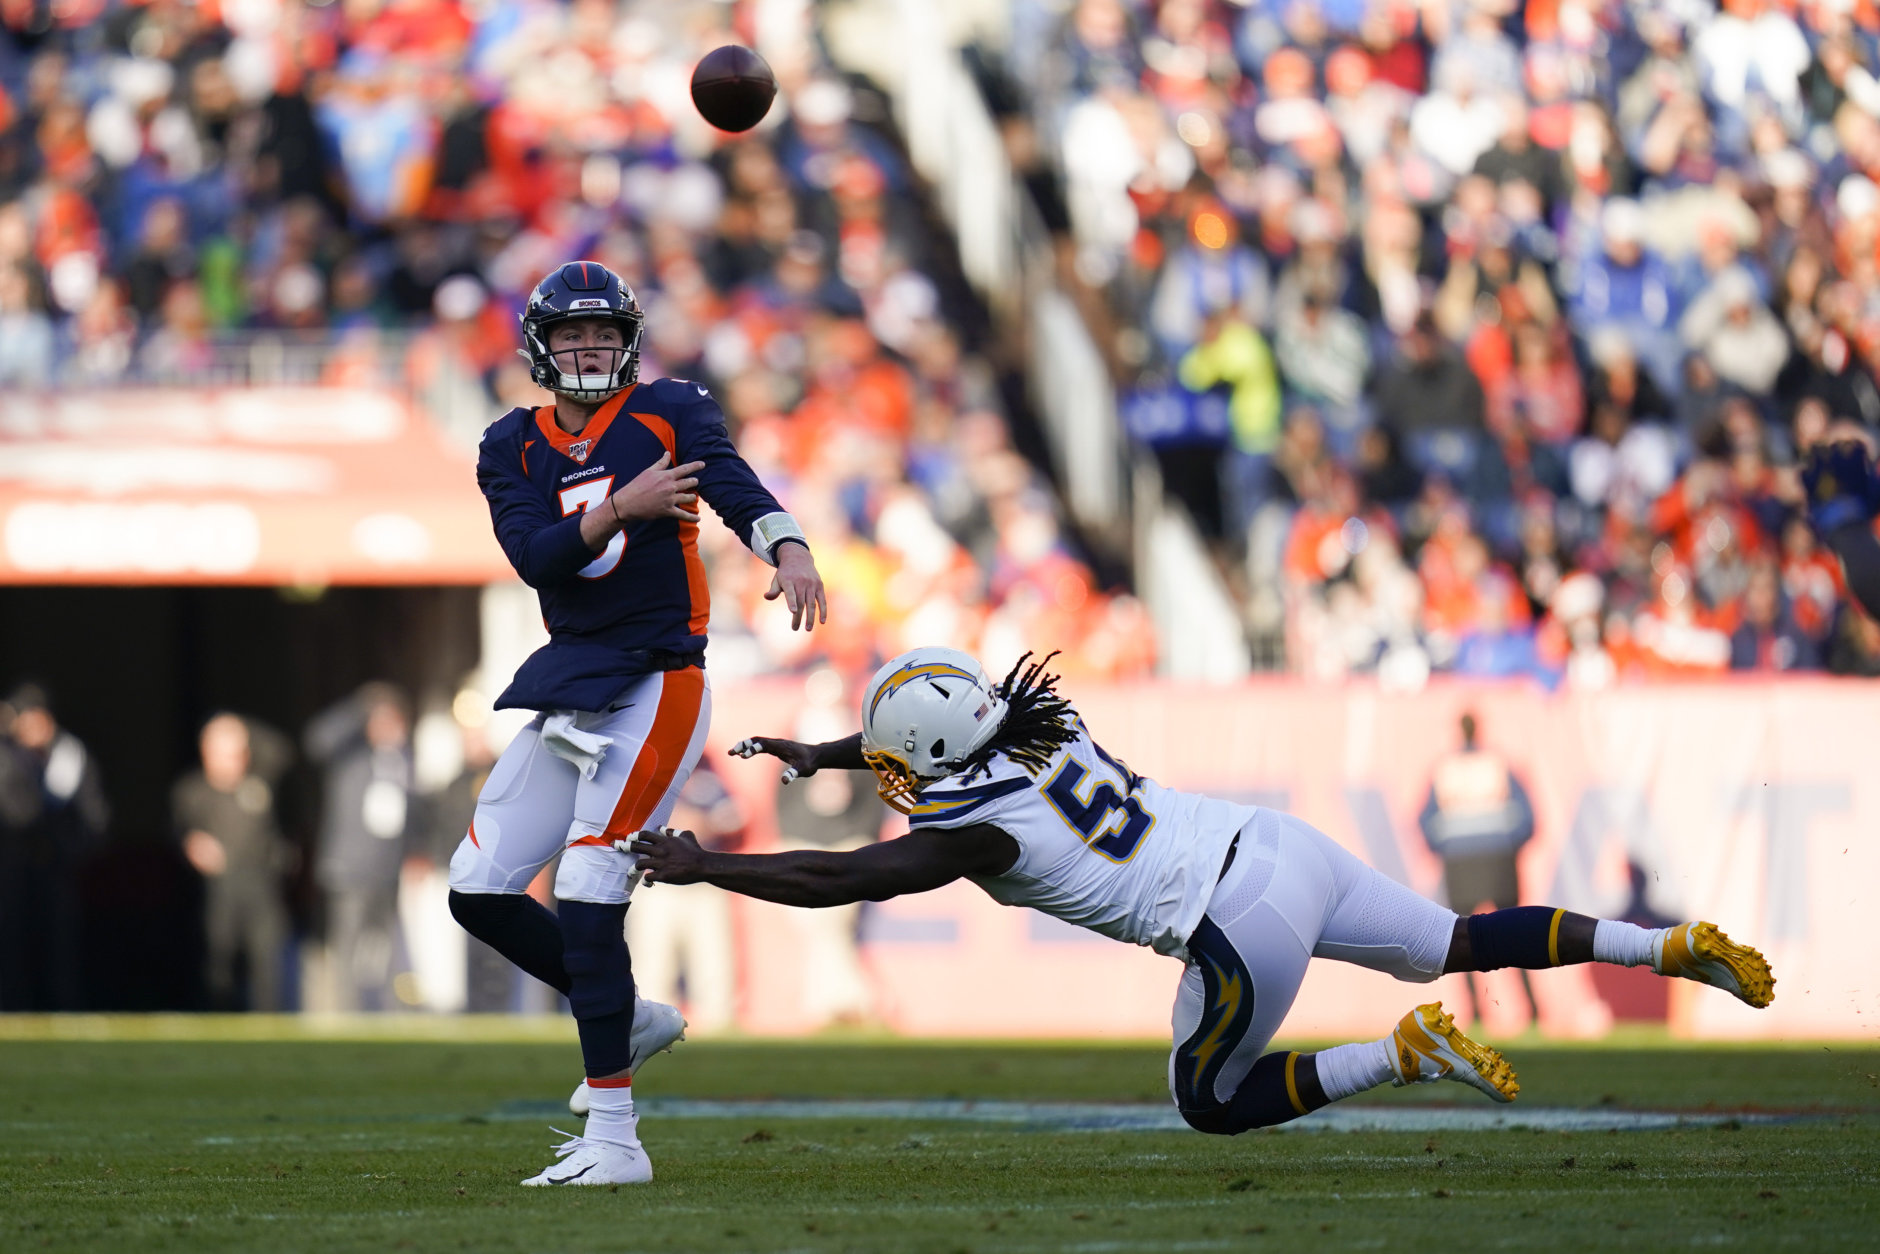 <p><b><i>Chargers 20</i></b><br />
<b><i>Broncos 23</i></b></p>
<p>Even though this result had more to do with <a href="https://www.espn.com/blog/los-angeles-chargers/post/_/id/27043/chargers-find-unique-way-to-lose-yet-another-heartbreaker-with-late-pi" target="_blank" rel="noopener" data-saferedirecturl="https://www.google.com/url?q=https://www.espn.com/blog/los-angeles-chargers/post/_/id/27043/chargers-find-unique-way-to-lose-yet-another-heartbreaker-with-late-pi&amp;source=gmail&amp;ust=1575342523390000&amp;usg=AFQjCNGI4mfN2DVAy4bXl9GN8i8A1GV7Cg">the Chargers&#8217; uncanny ability to blow games late</a> and with stunning regularity, Drew Lock&#8217;s debut victory made Denver the first team in NFL history to have two quarterbacks start and win their NFL debuts in the same season. Now, if John Elway could actually find a QB worthy of starting multiple games, the Broncos might actually be a good team again.</p>
